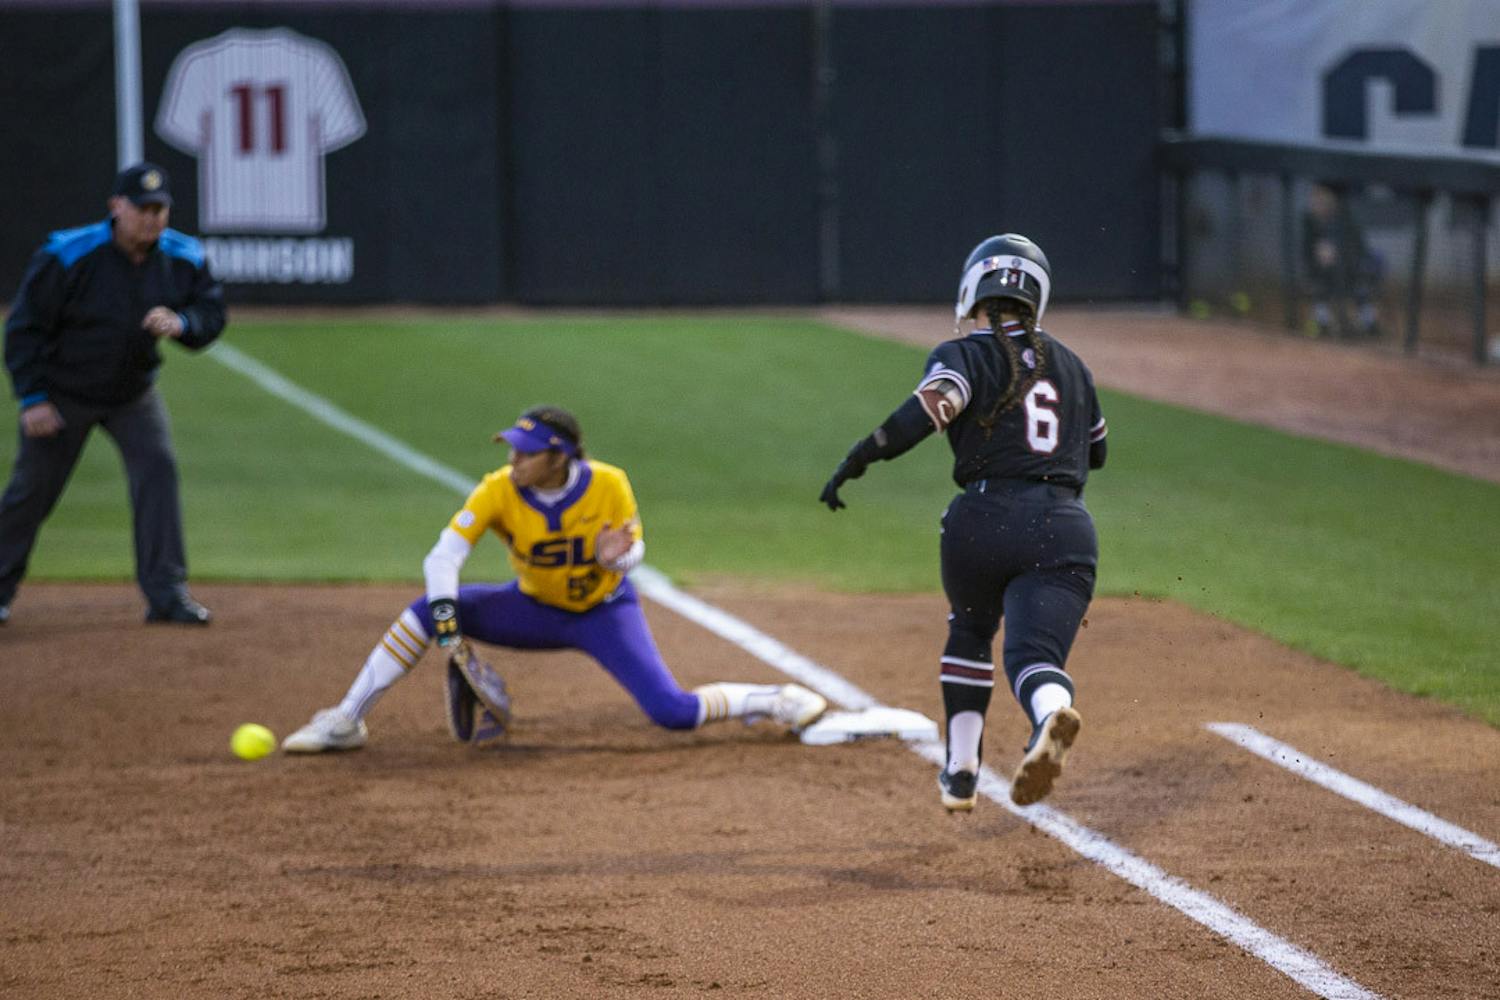 Fifth-year catcher and infielder Jordan Fabian tries to outrun the play to first base during the matchup between South Carolina and LSU at Beckham Field on March 13, 2023. The Tigers beat the Gamecocks 5-1 during the second game of the doubleheader.&nbsp;